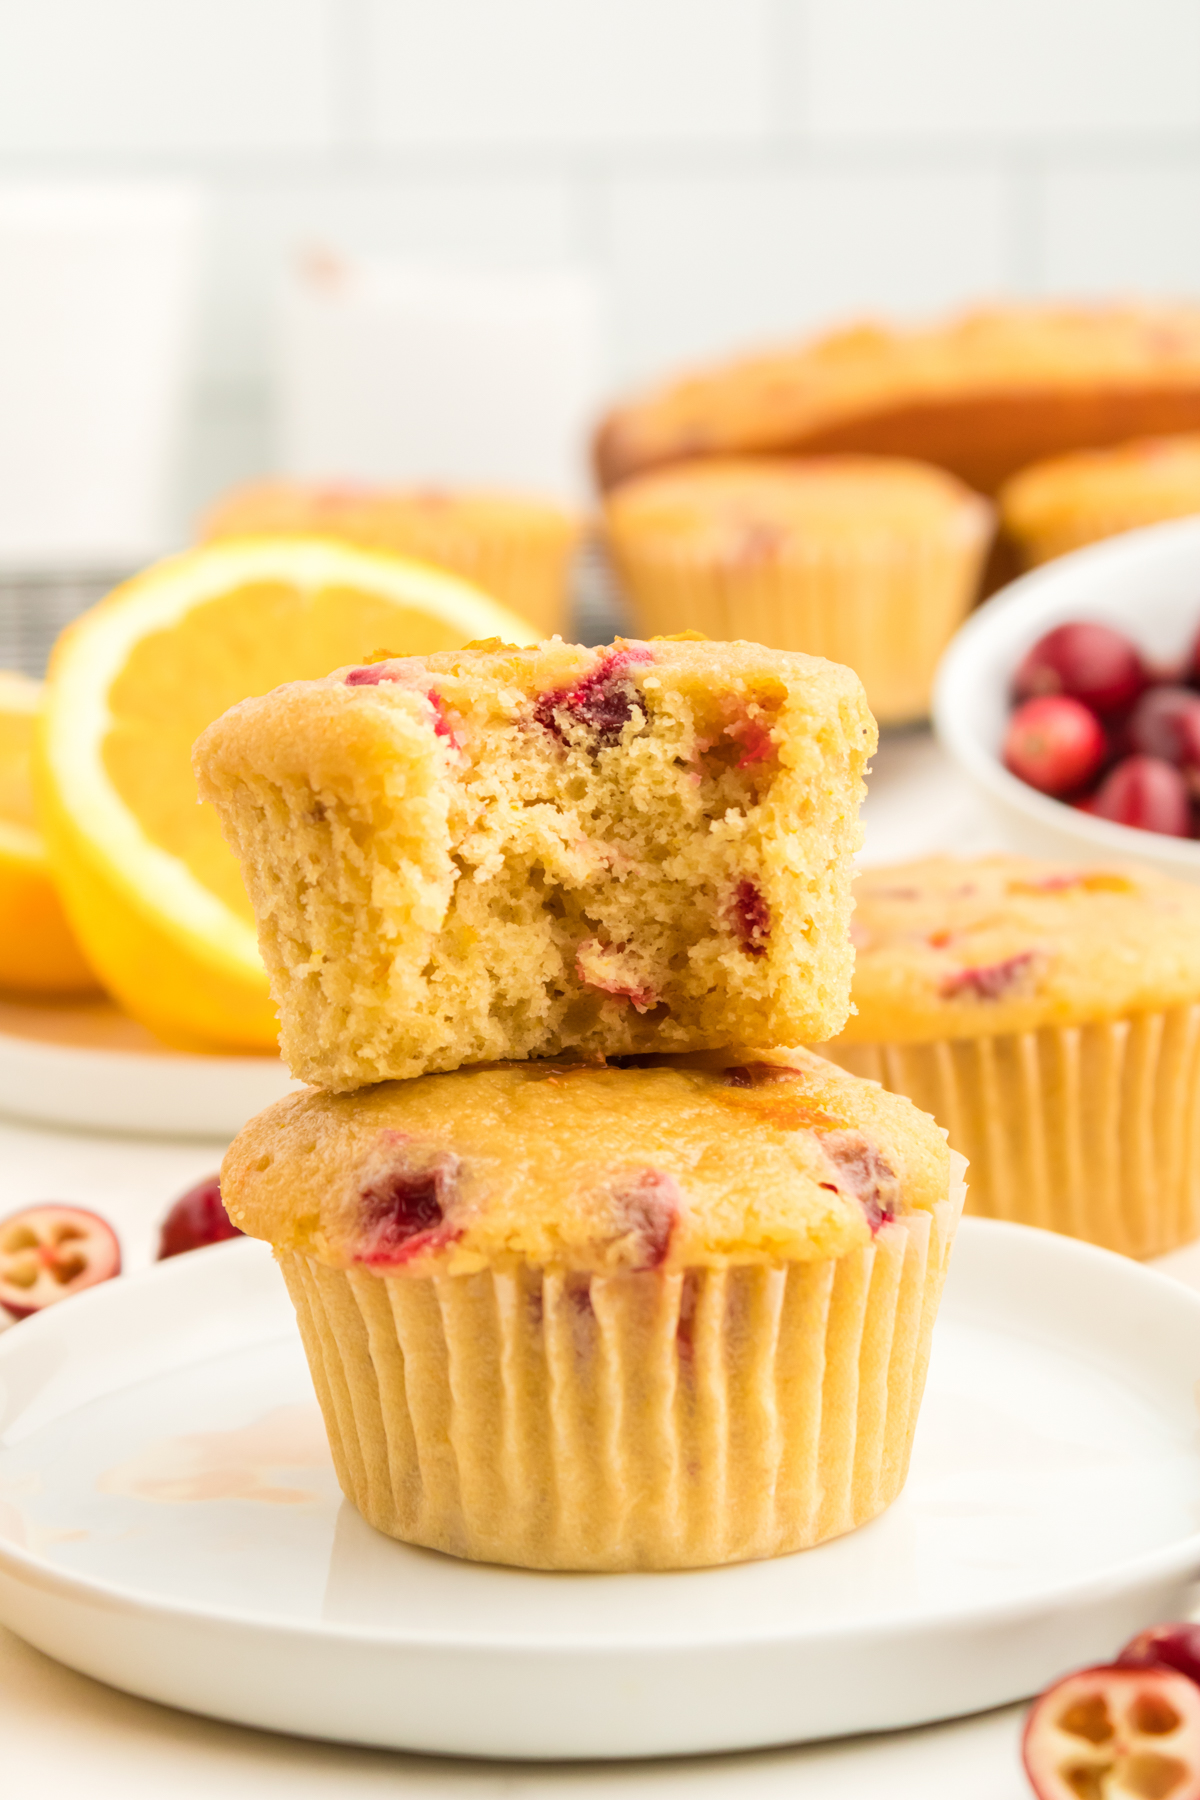 These Orange Cranberry Muffins are so easy to make and the perfect addition to any morning breakfast. Bursting with fresh cranberries and full of orange flavor from both orange juice and zest, these incredible muffins deserve to be eaten all year long and not just during the holidays! via @foodhussy